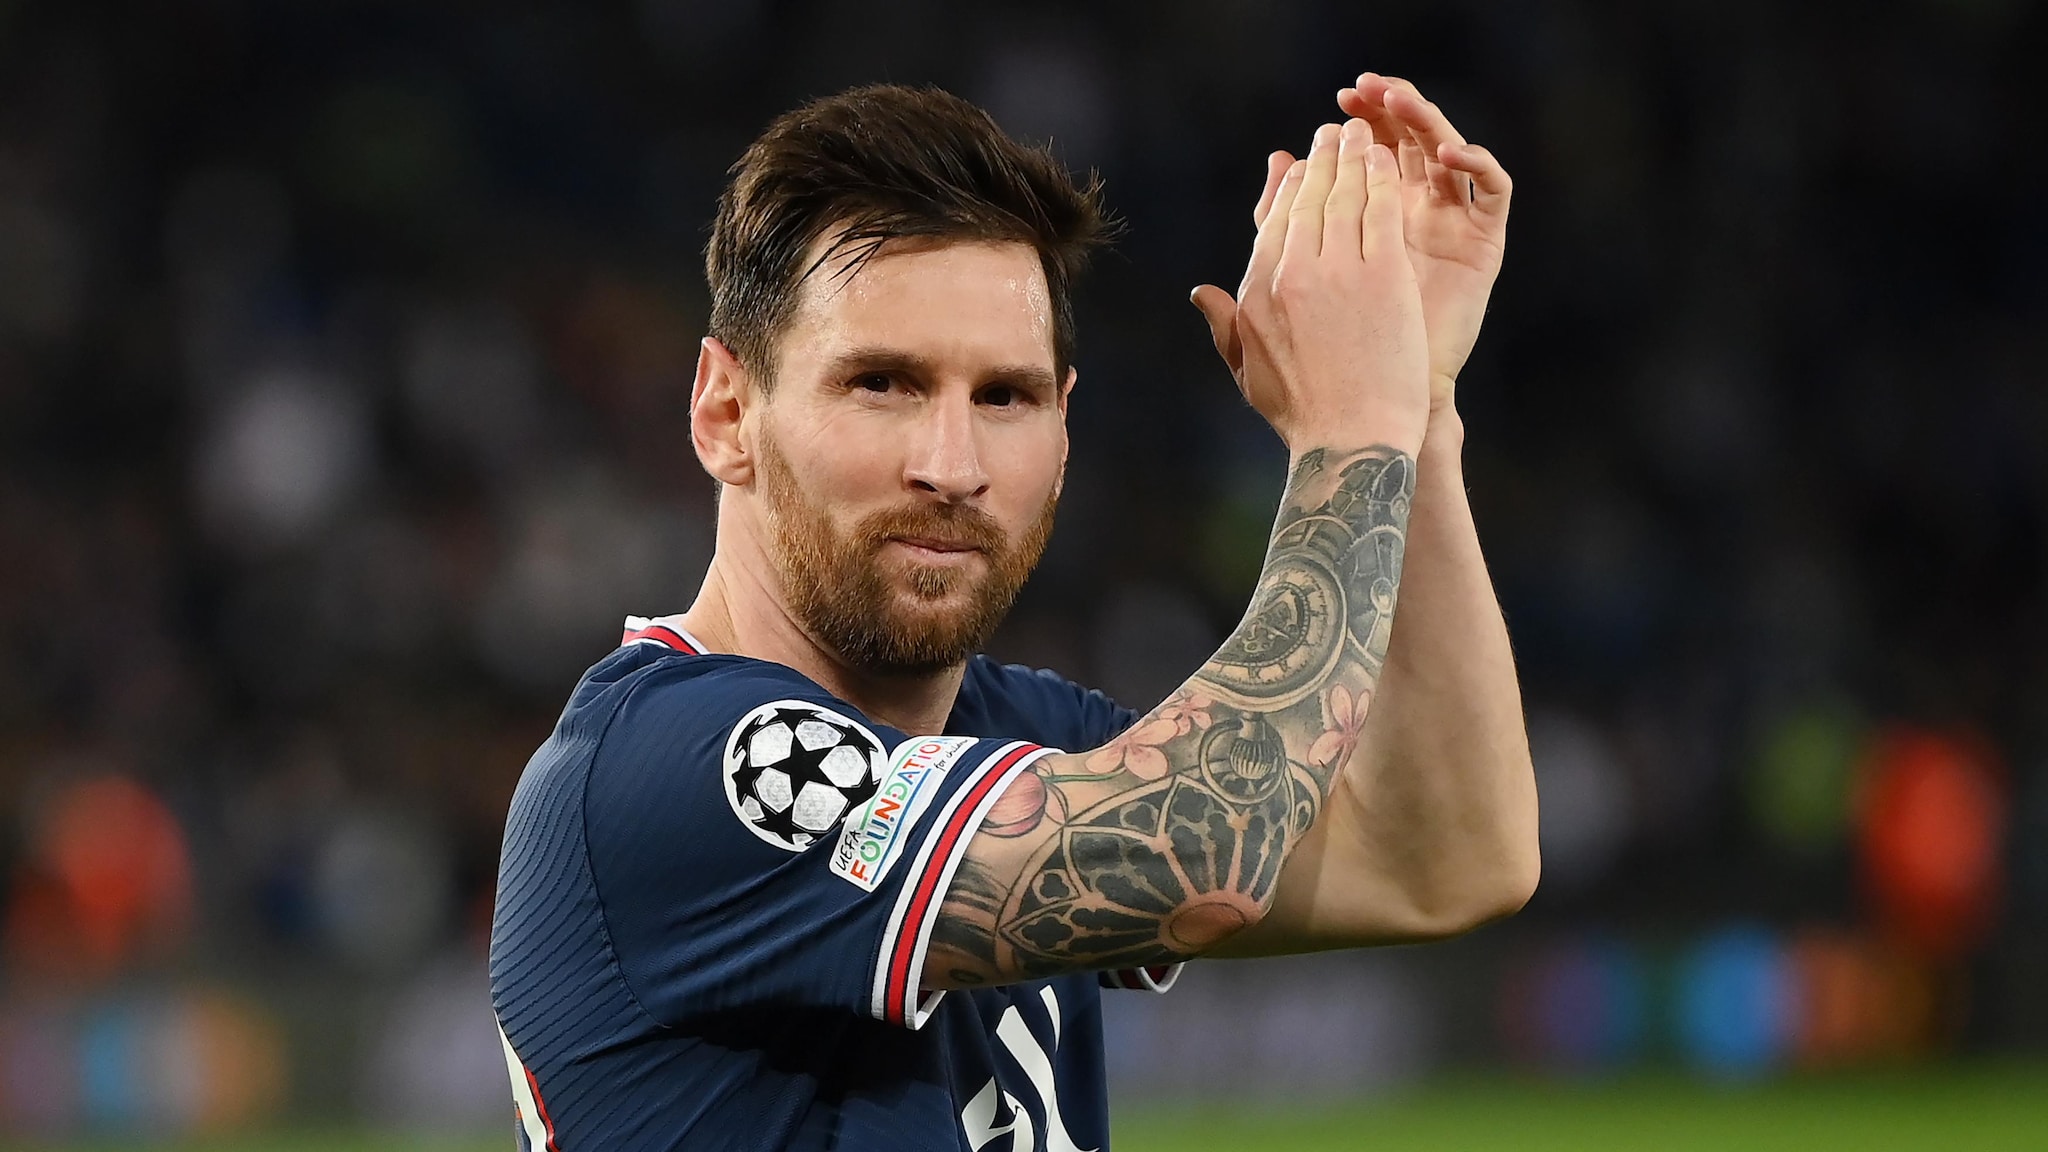 Lionel Messi at 35: What records does he hold? | UEFA Champions League |  UEFA.com